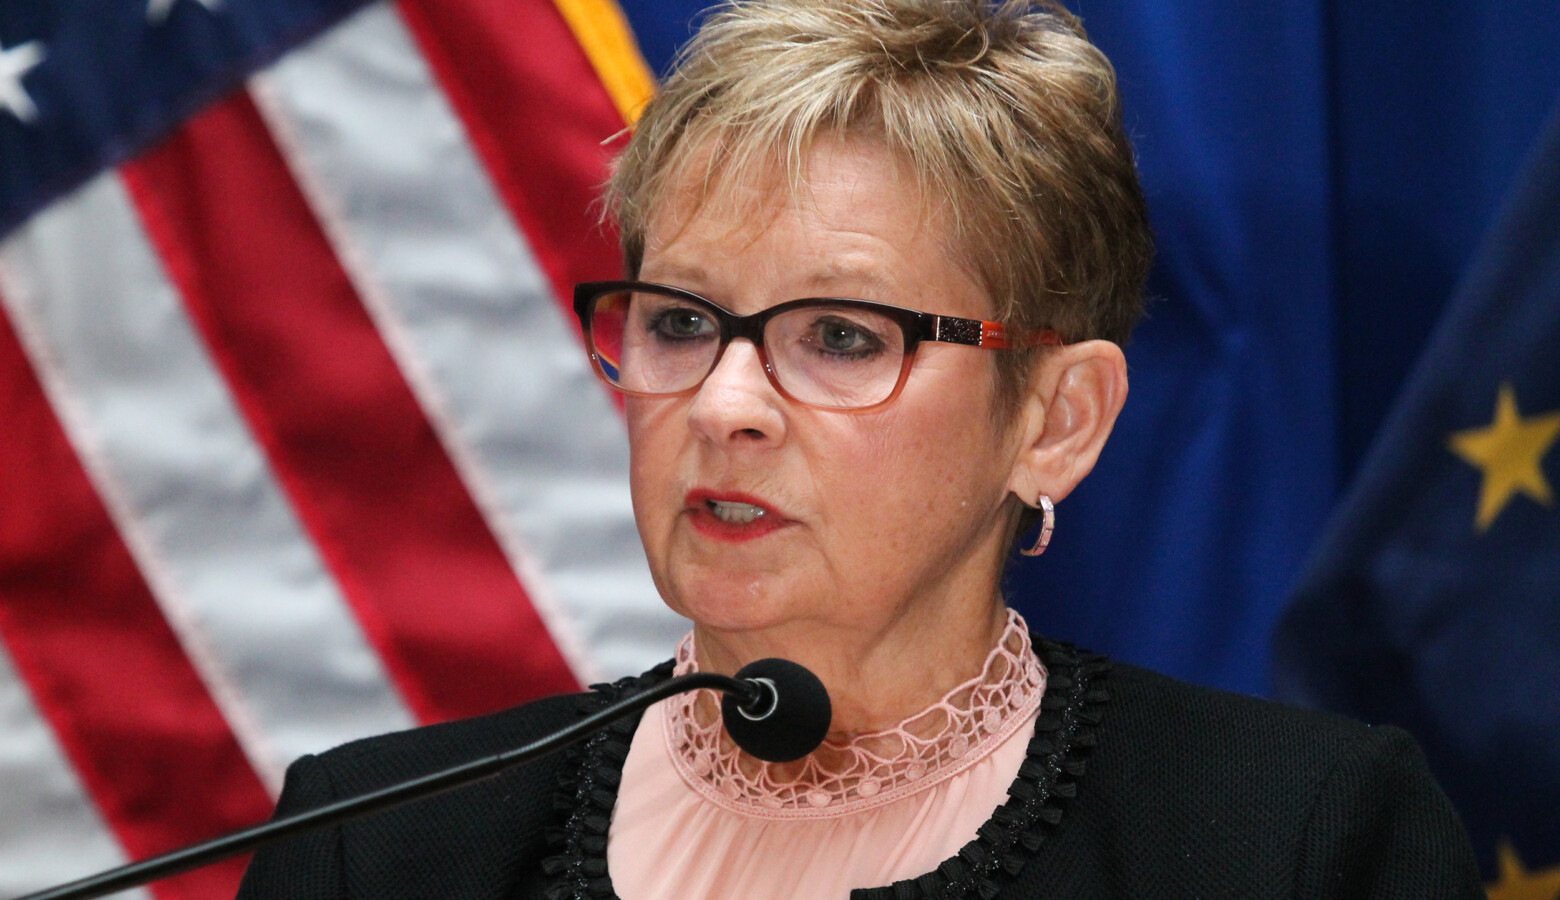 Secretary of State Connie Lawson says both state party leaders are in consensus about moving Indiana's primary election to June 2. (Lauren Chapman/IPB News)